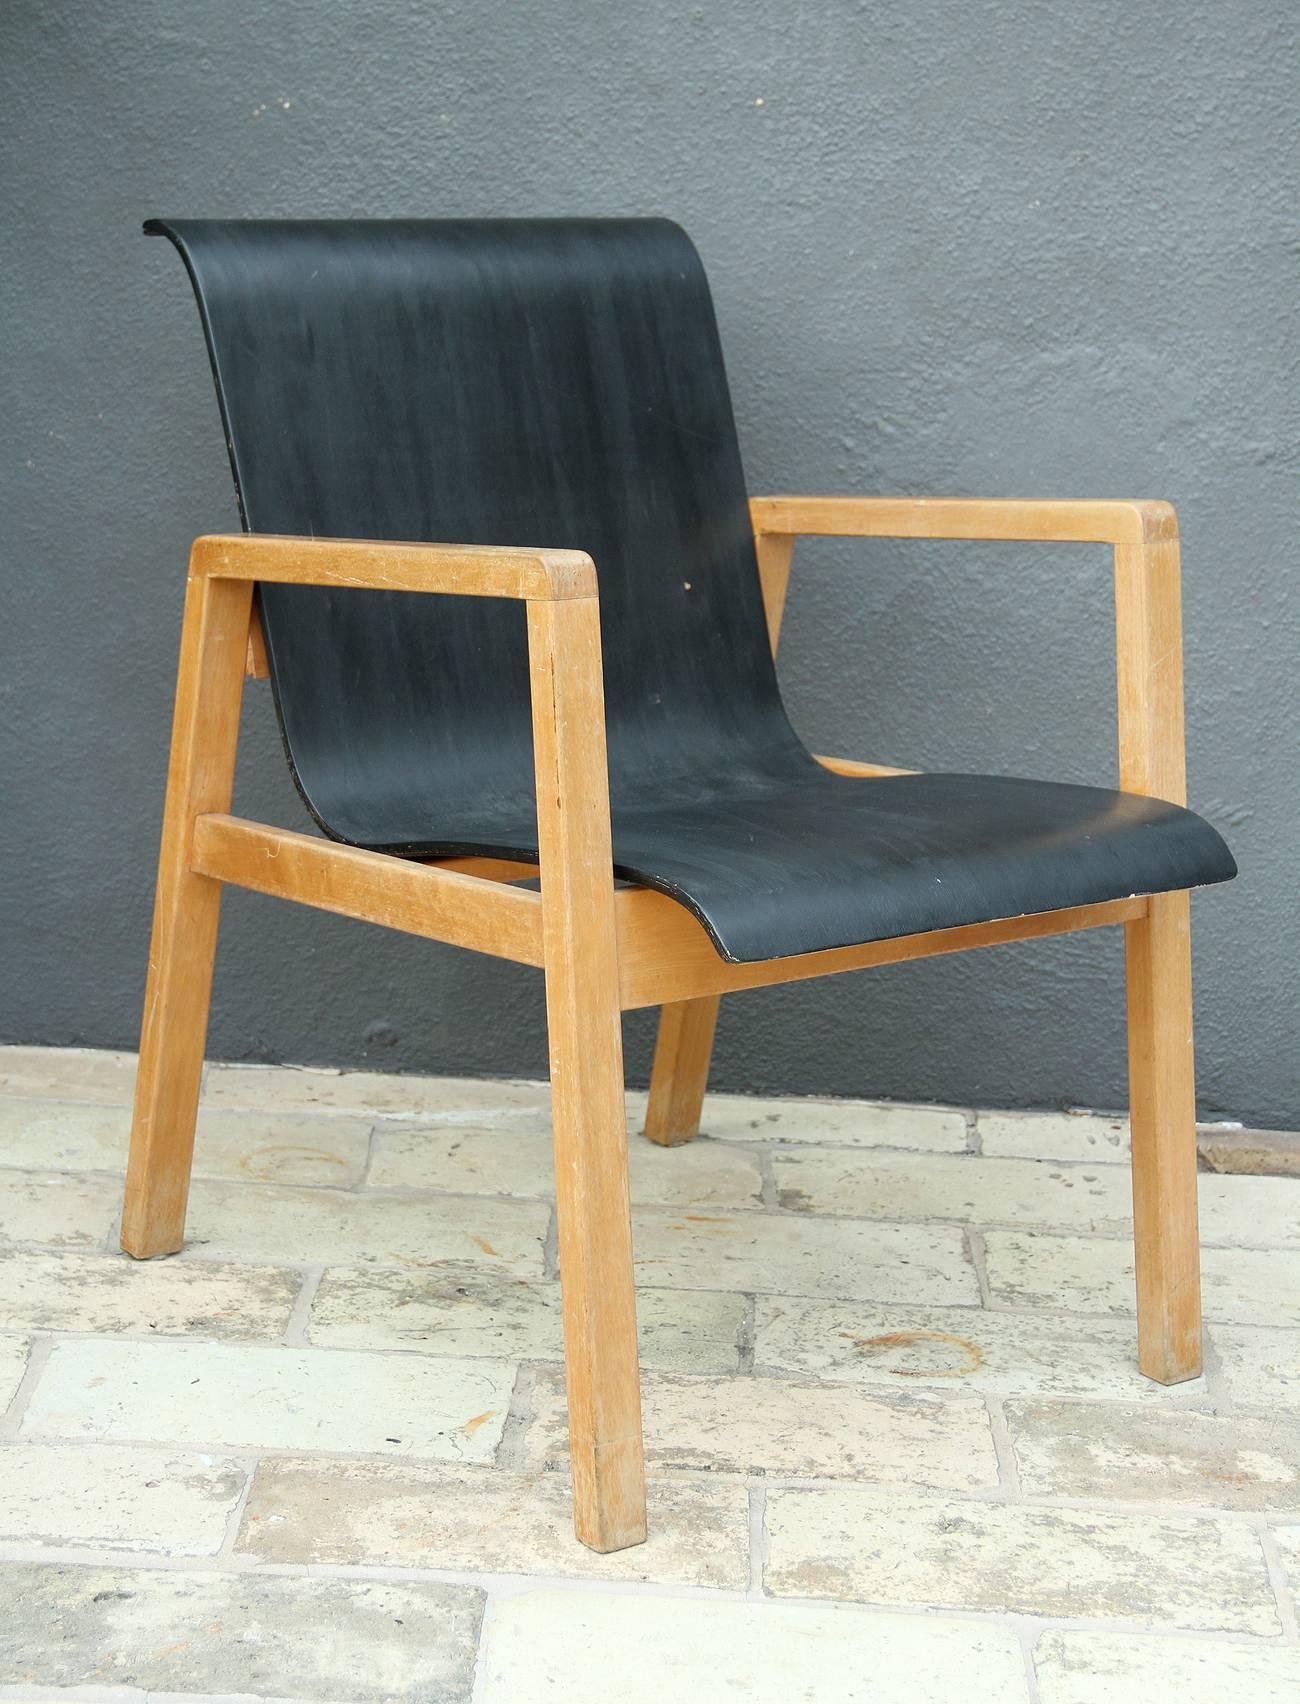 Alvar Aalto
hallway chair, designed in 1932 for the Paimio Sanatorium, Southwest Finland, model no. 51/403.
France, circa 1935-1940.
Natural and black painted laminated-birch plywood.
Original condition.